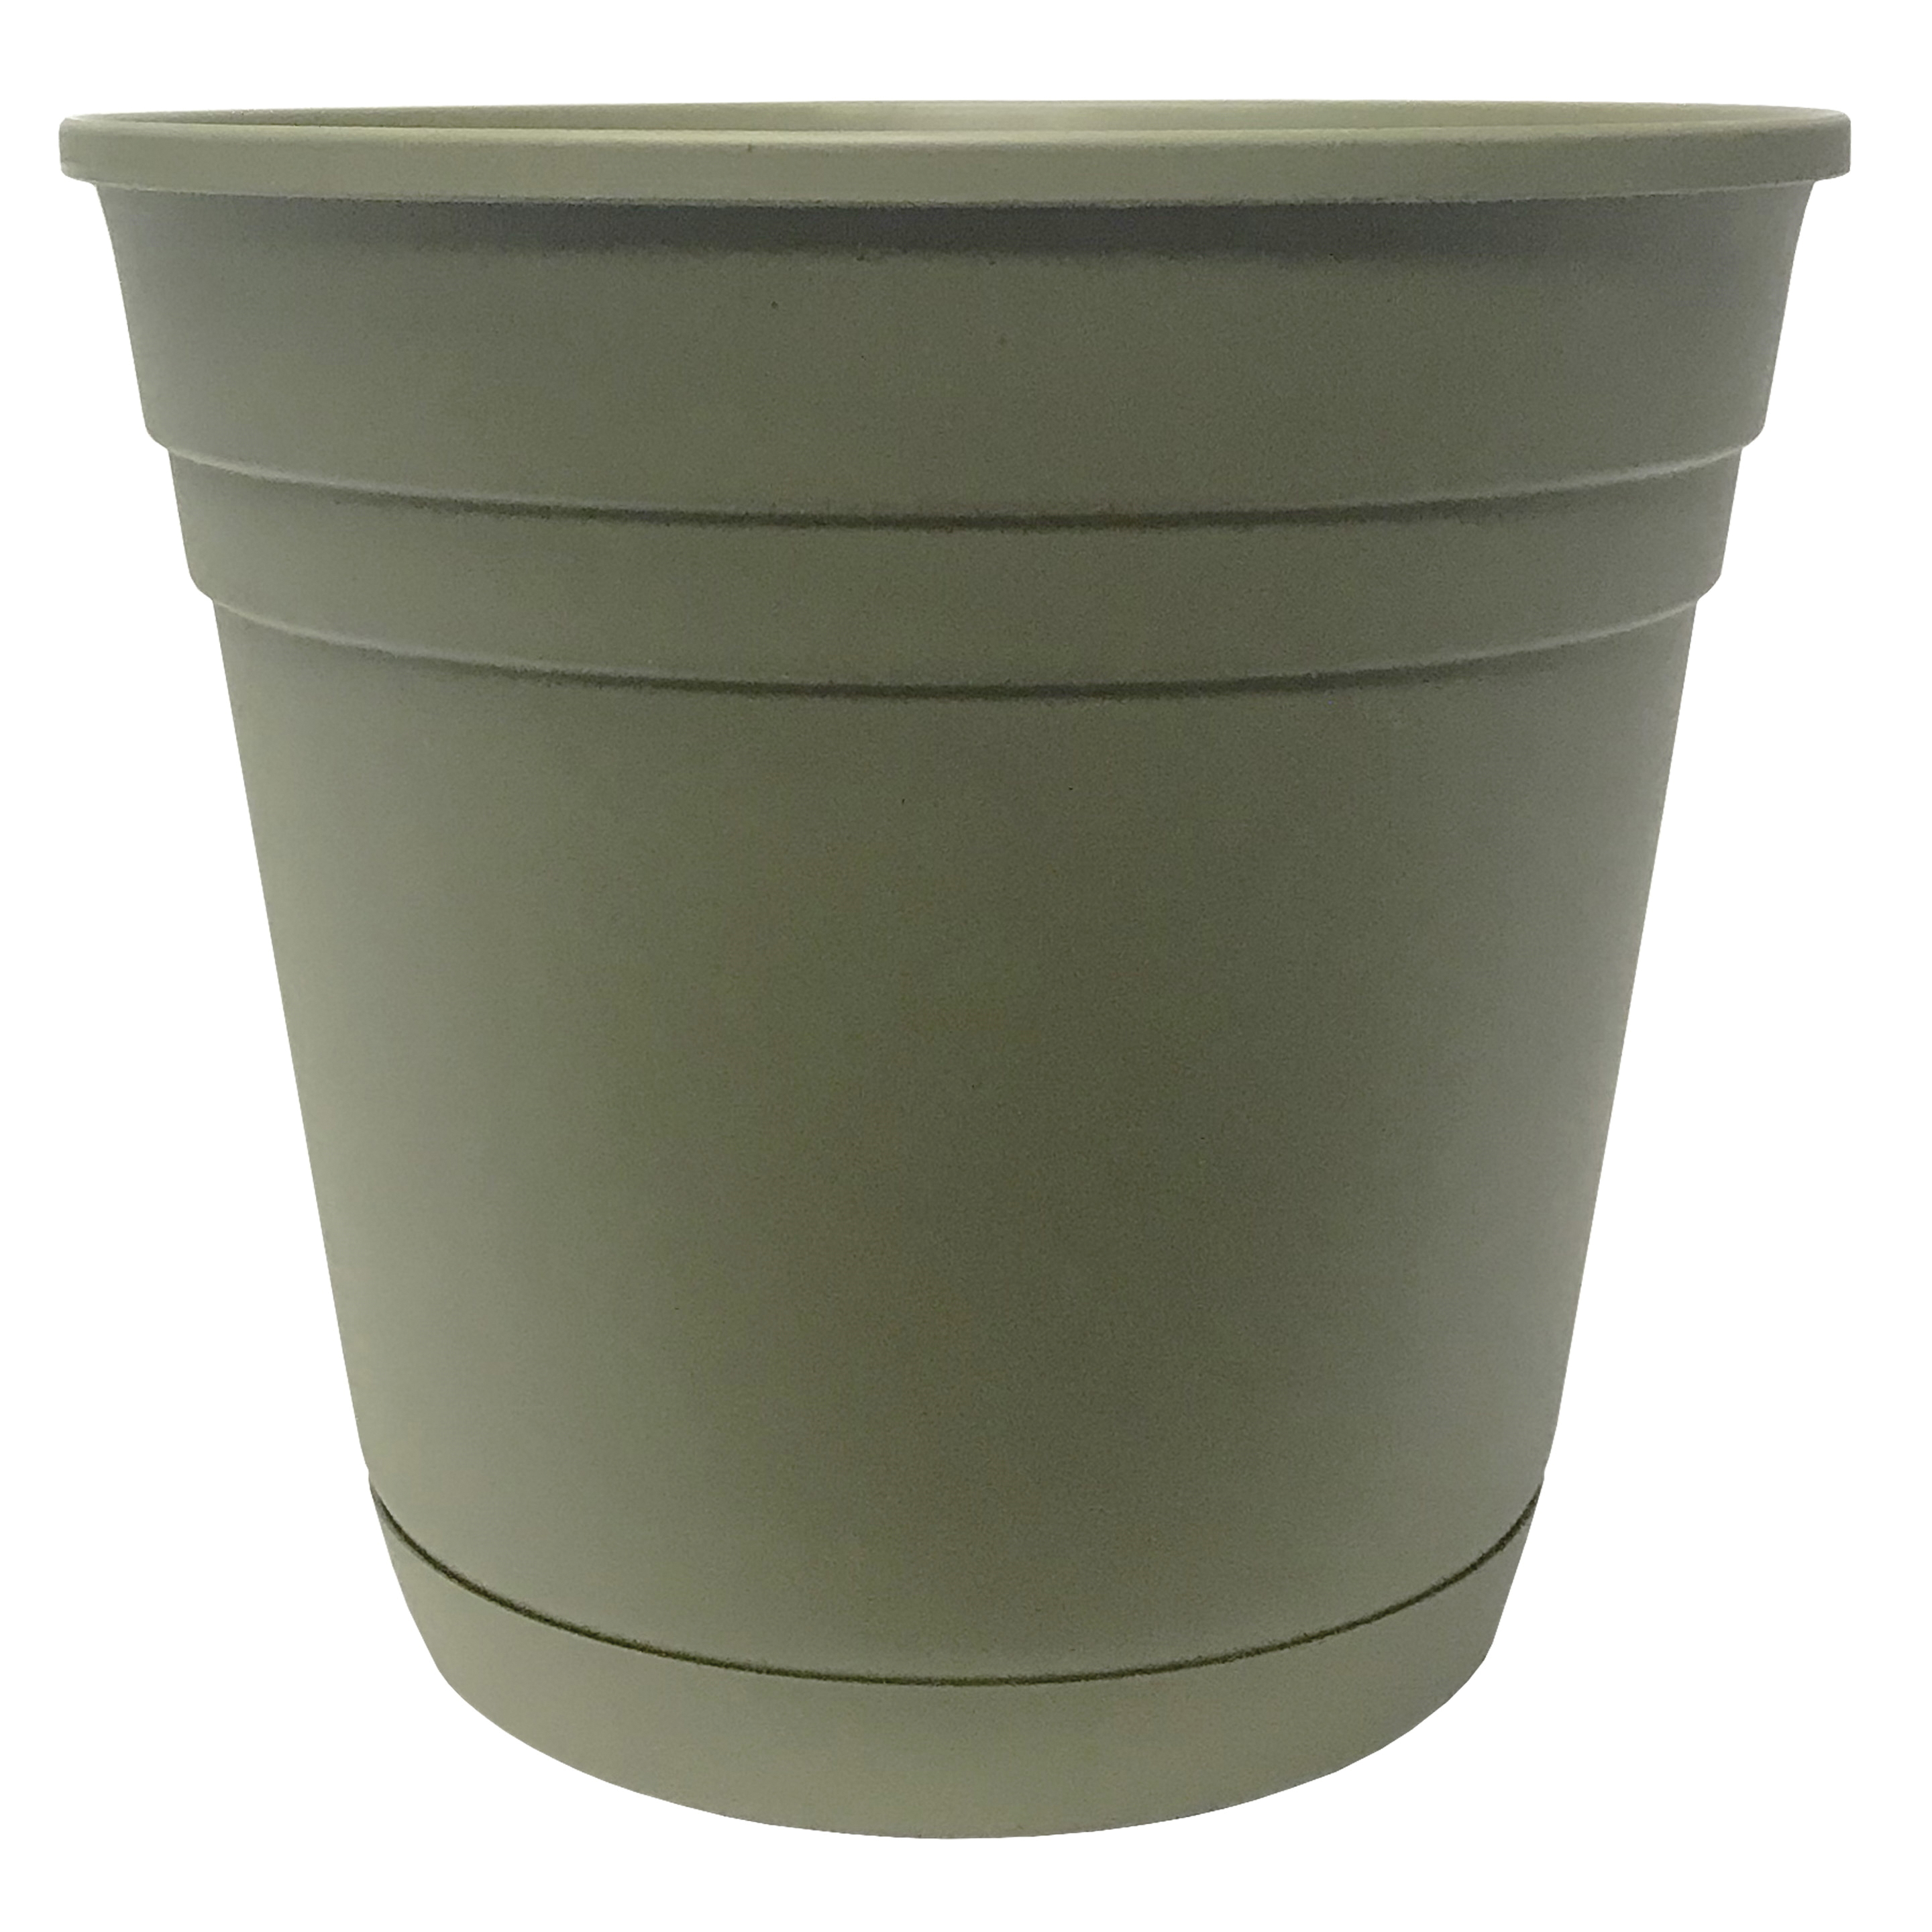 RN2008OG Planter with Attached Saucer, 16-3/4 in H, 20 in W, 20 in D, Round, Riverland Design, Resin